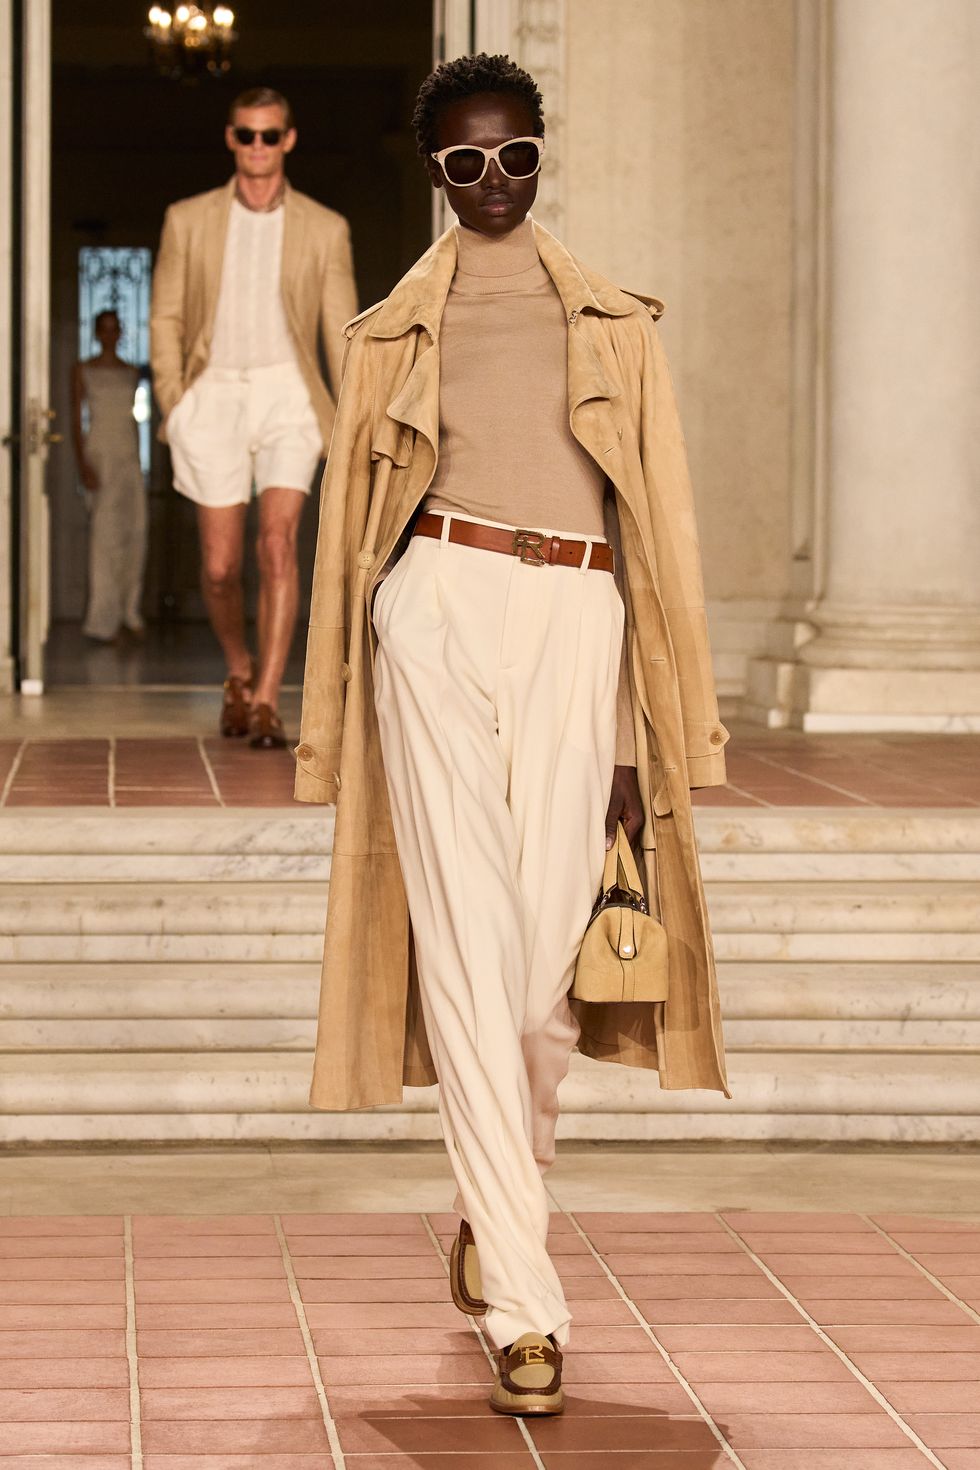 Ralph Lauren goes west for Spring 2023 fashion show